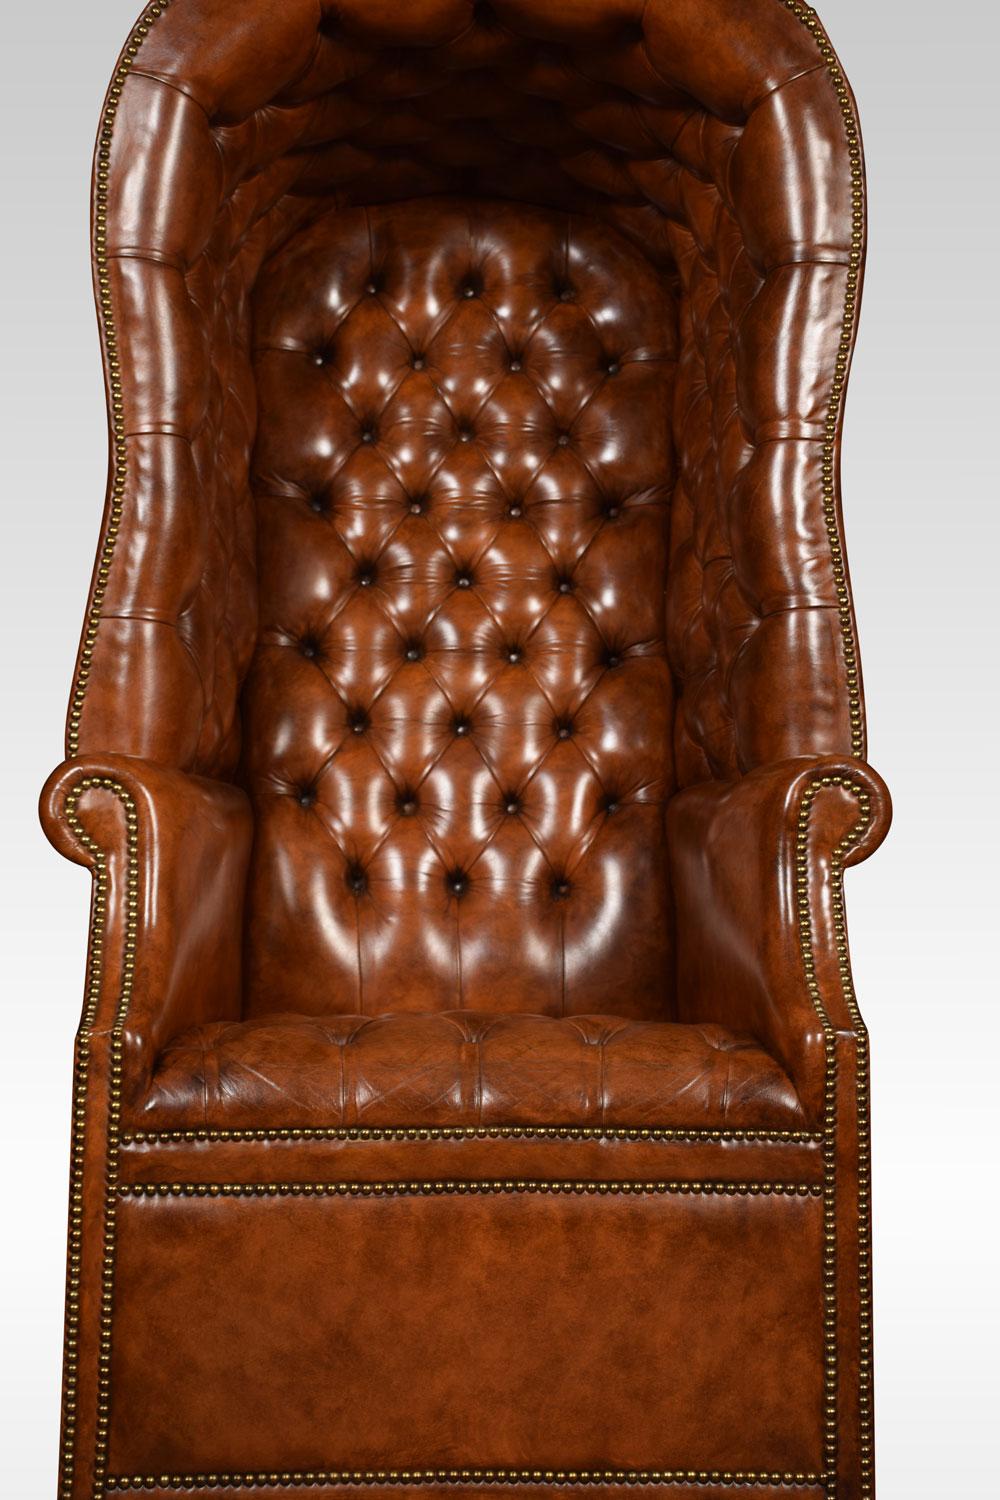 Regency style hall porter’s chair the domed top, back, sides and seat covered in close-nailed leather, the back and seat deep buttoned. All raised up on castors.
Dimensions:
Height 62 inches, Height to seat 20 inches
Width 31.5 inches
Depth 35